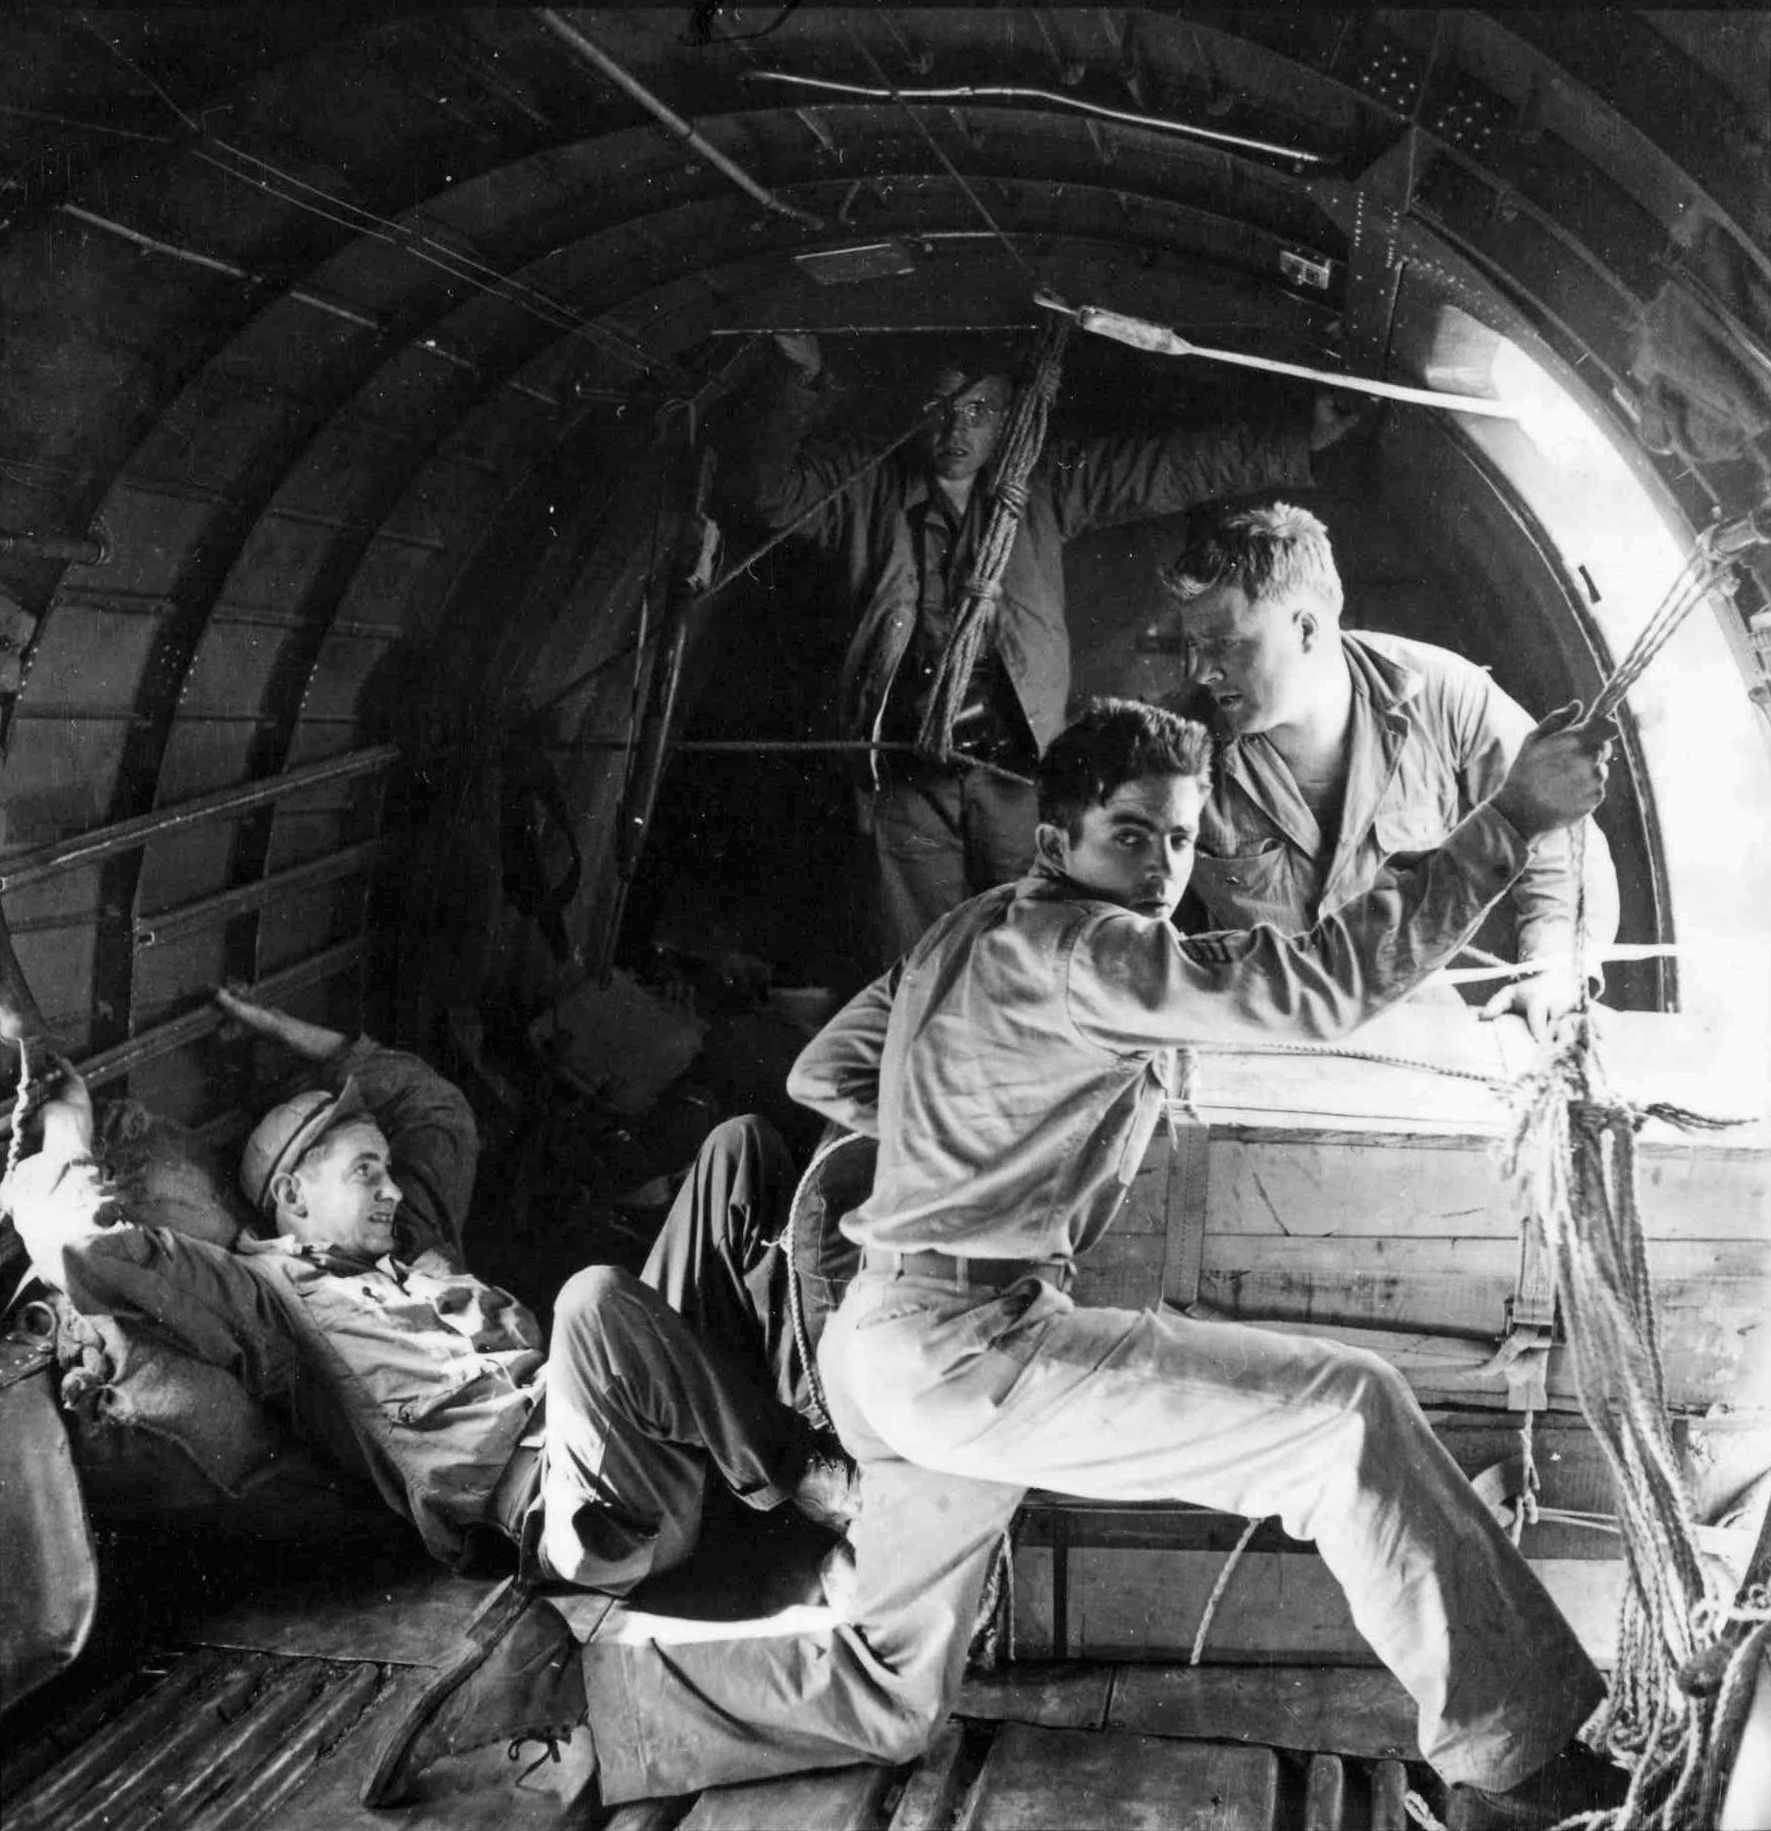 During the April 16, 1944, flight, Sergeant Donald Ross watches for a signal from the cockpit of a C-47. Private Robert Crane is positioned against the side of a box, ready to shove it out the door. Pfc. Charles Banks is positioned behind the box, while Brig. Gen. Frank Merrill observes.